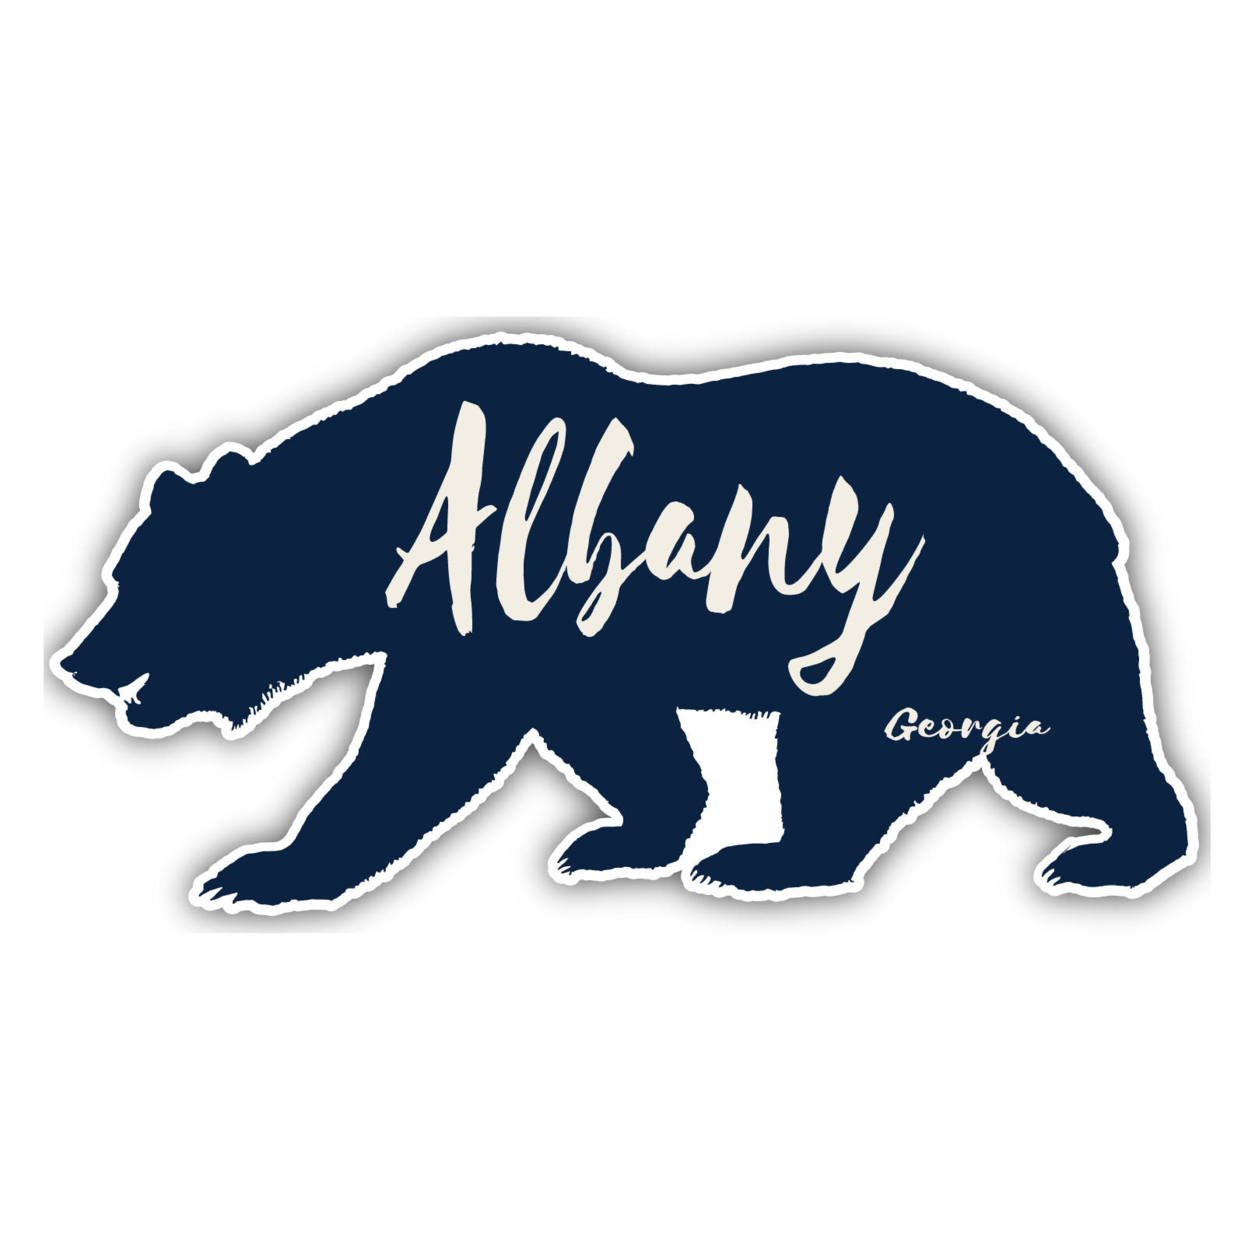 Albany Georgia Souvenir Decorative Stickers (Choose Theme And Size) - 4-Pack, 4-Inch, Camp Life